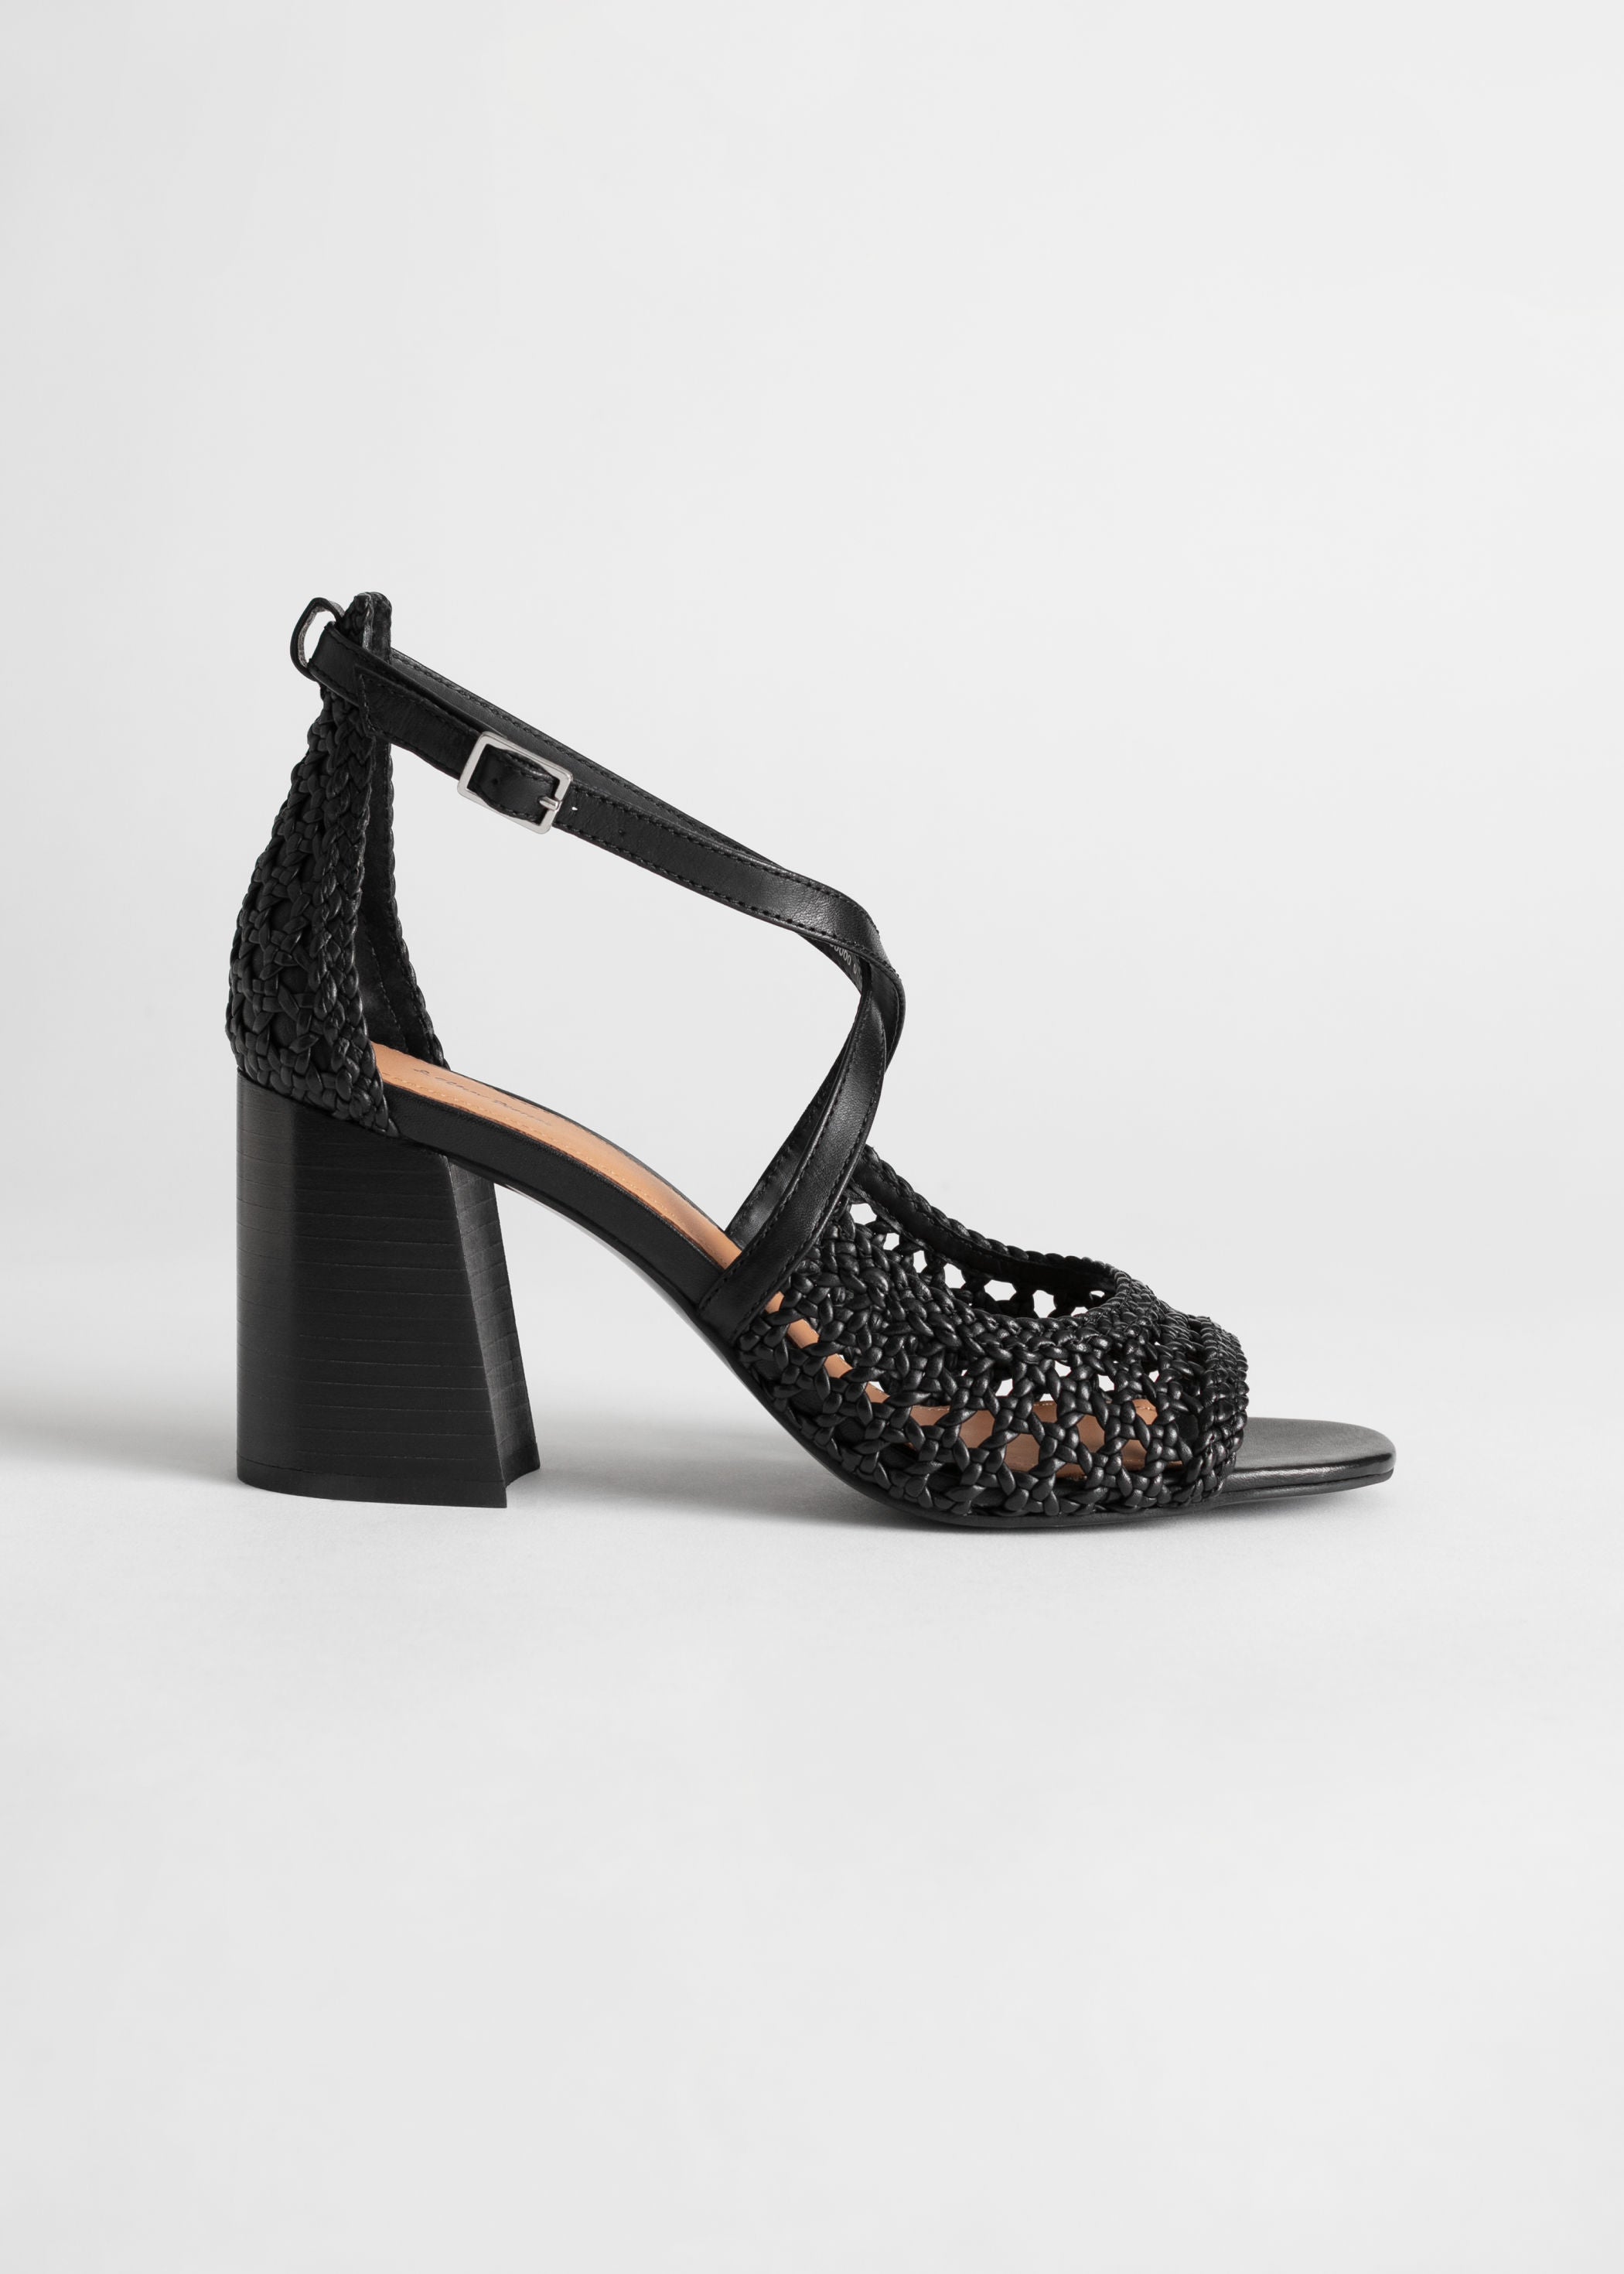 & Other Stories + Woven Leather Heeled Sandals